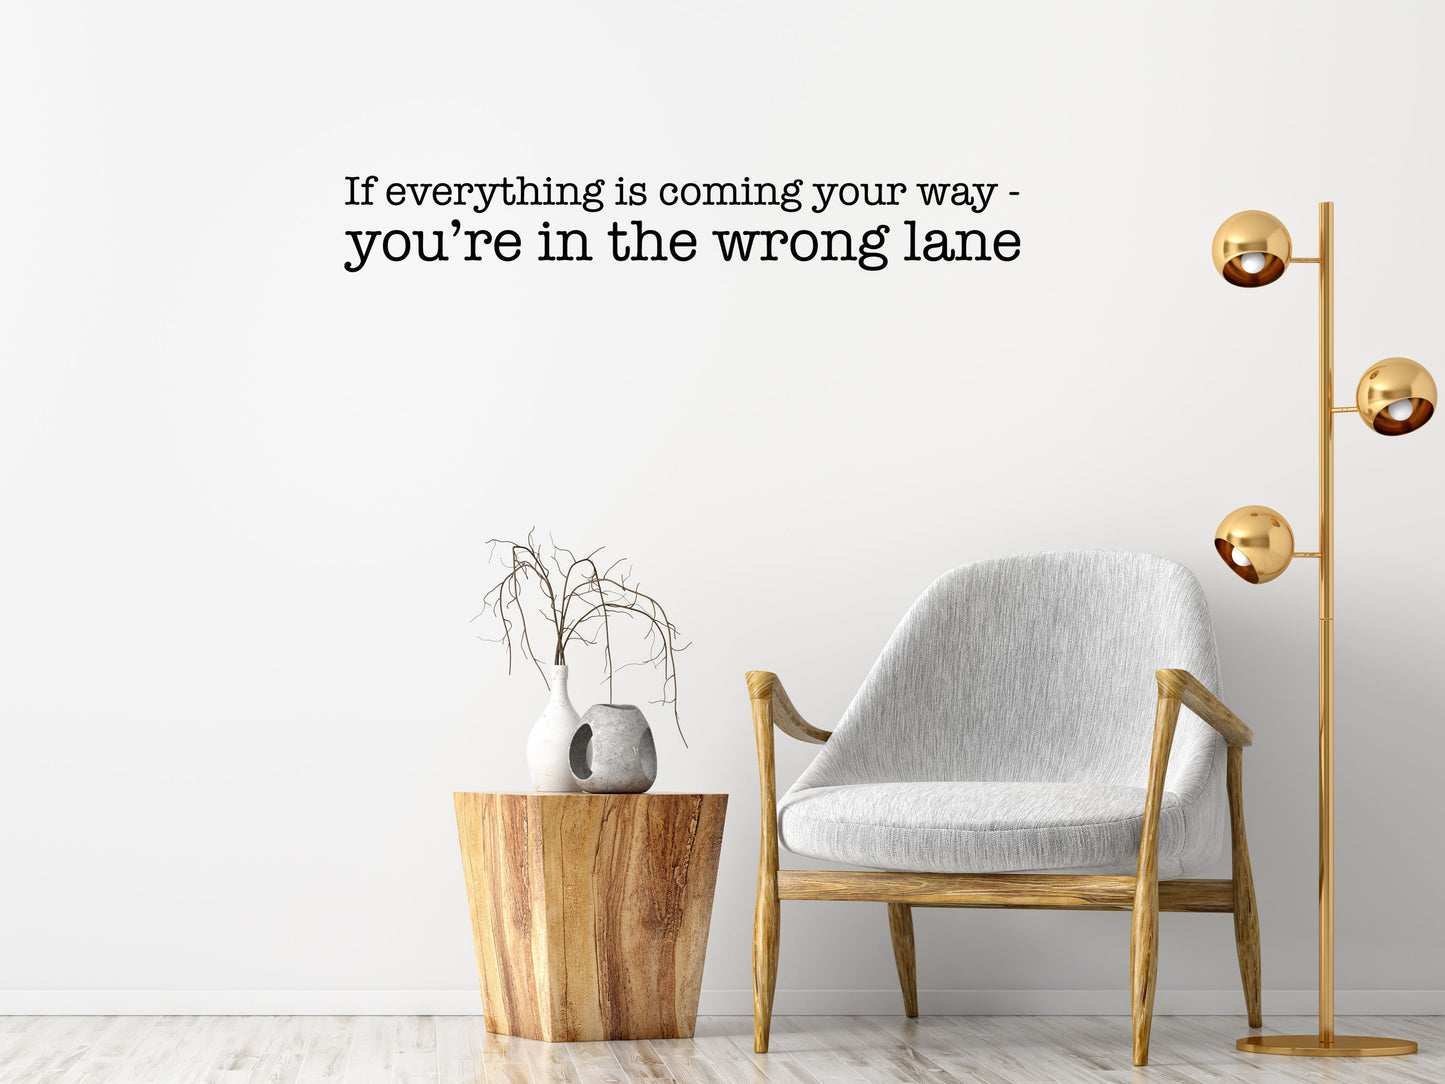 The Wrong Lane - Inspirational Wall Signs Vinyl Wall Decal Done 